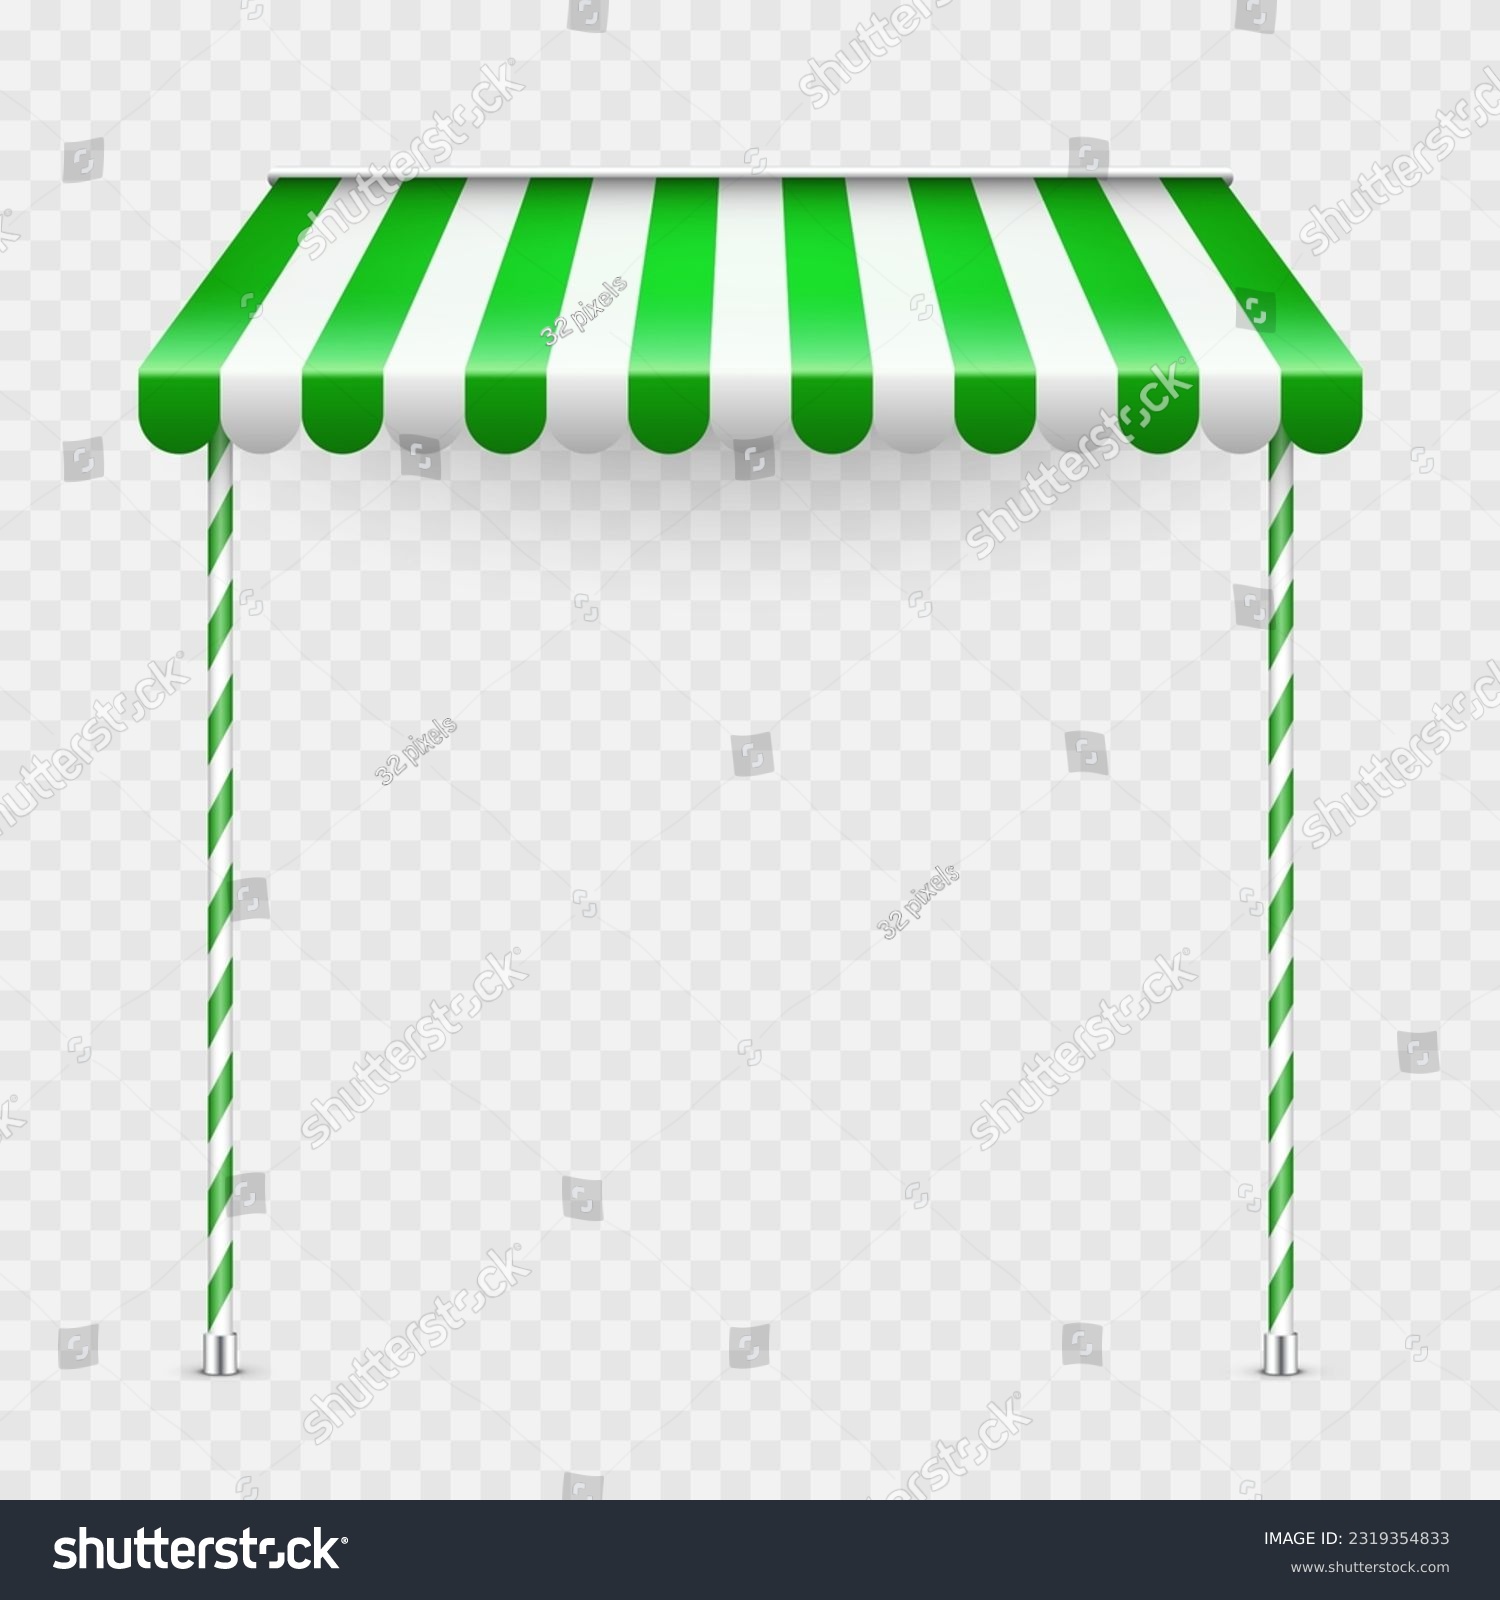 SVG of Green shop sunshade with stand holders. Realistic striped cafe awning. Outdoor market tent. Roof canopy. Summer street store. Vector illustration svg